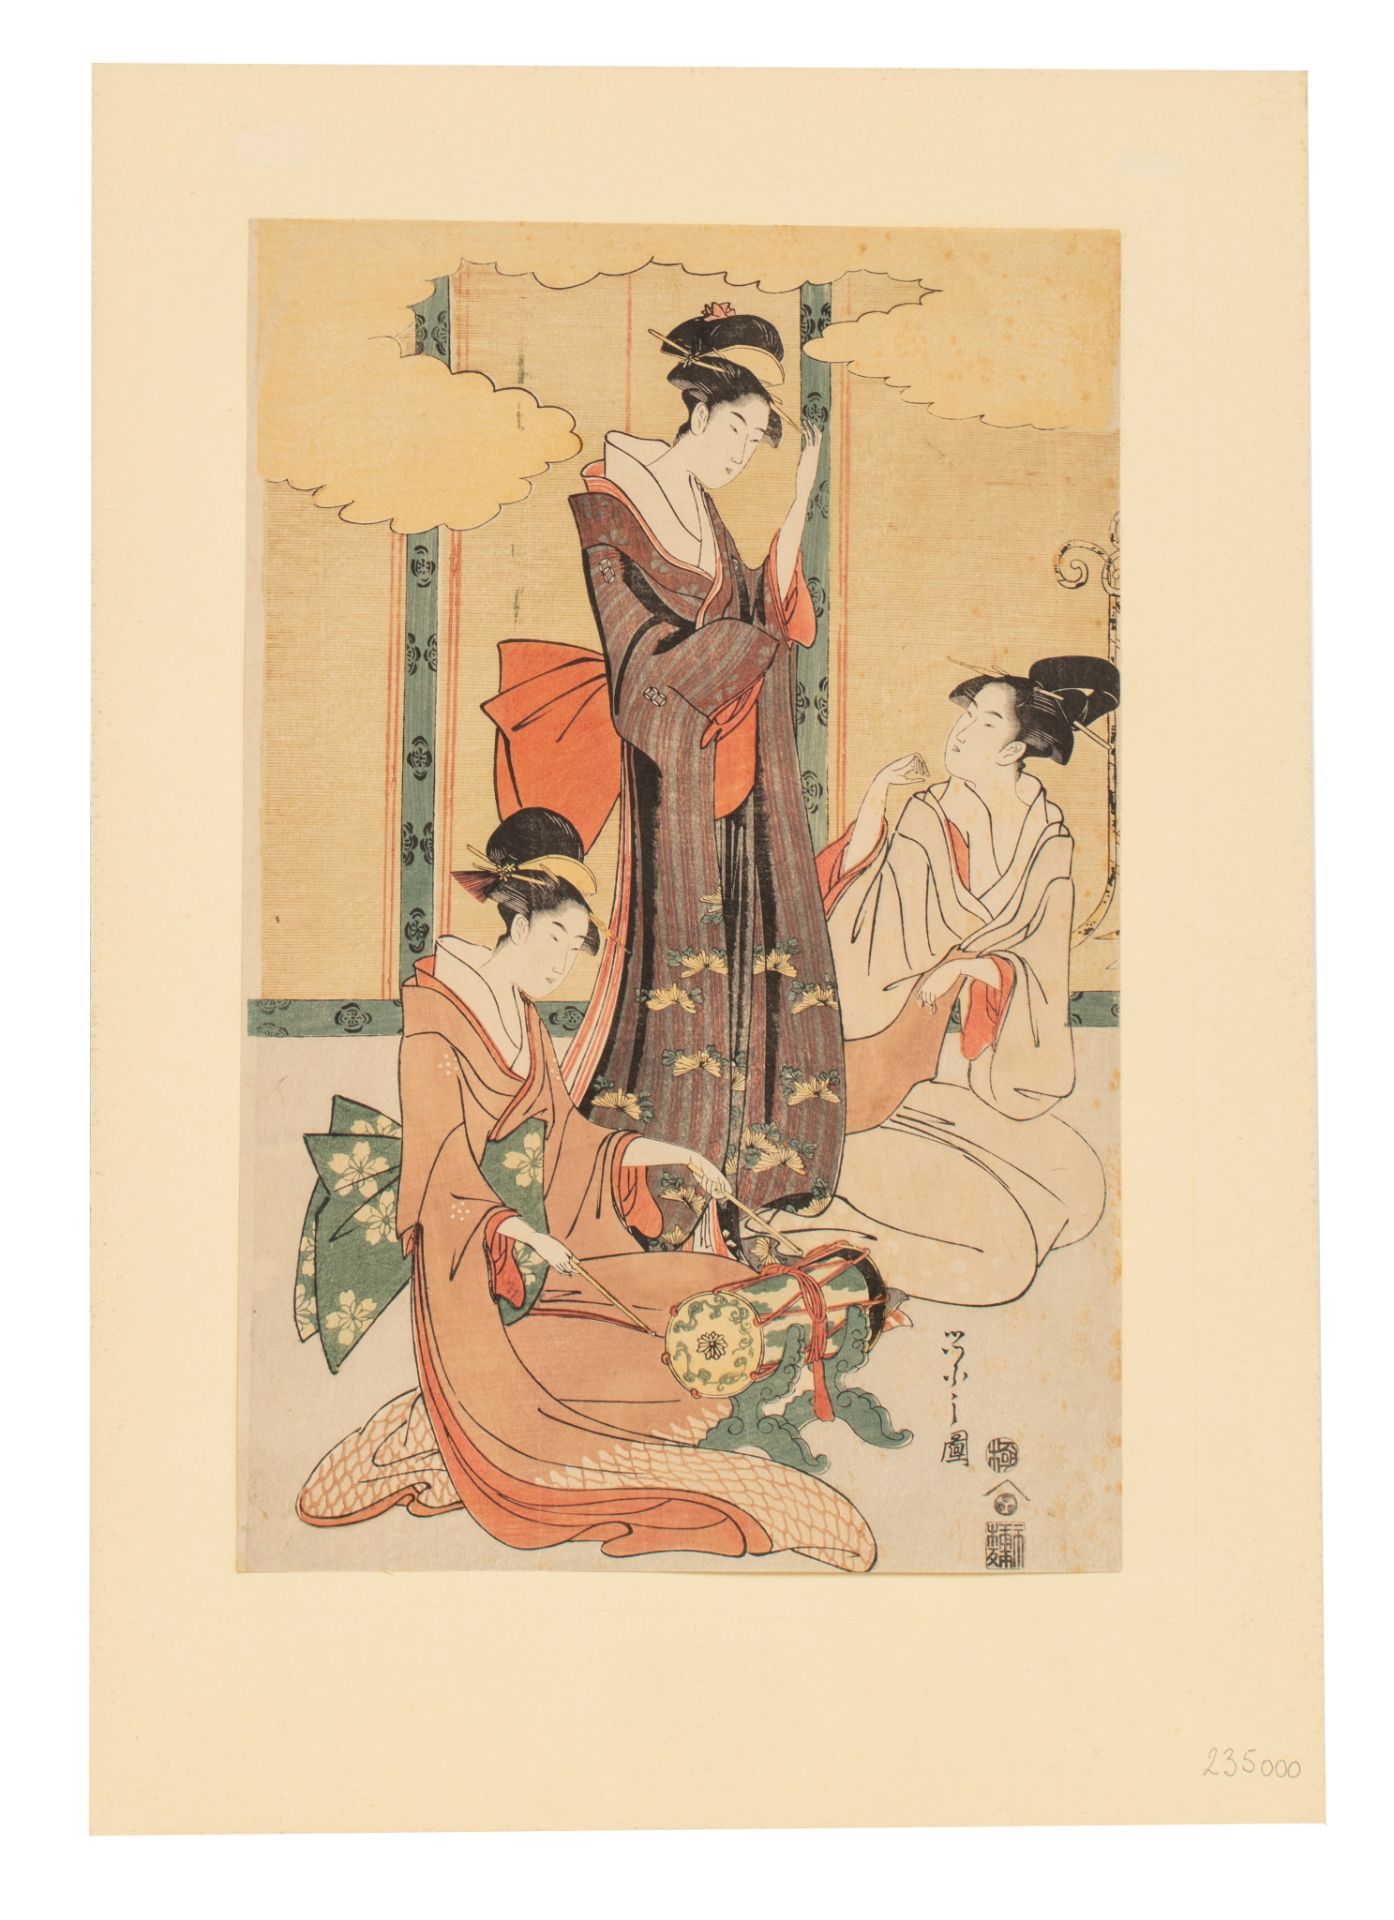 A Japanese woodblock print by Eishi, from the series on musical accomplishments, three courtesans on - Image 3 of 4